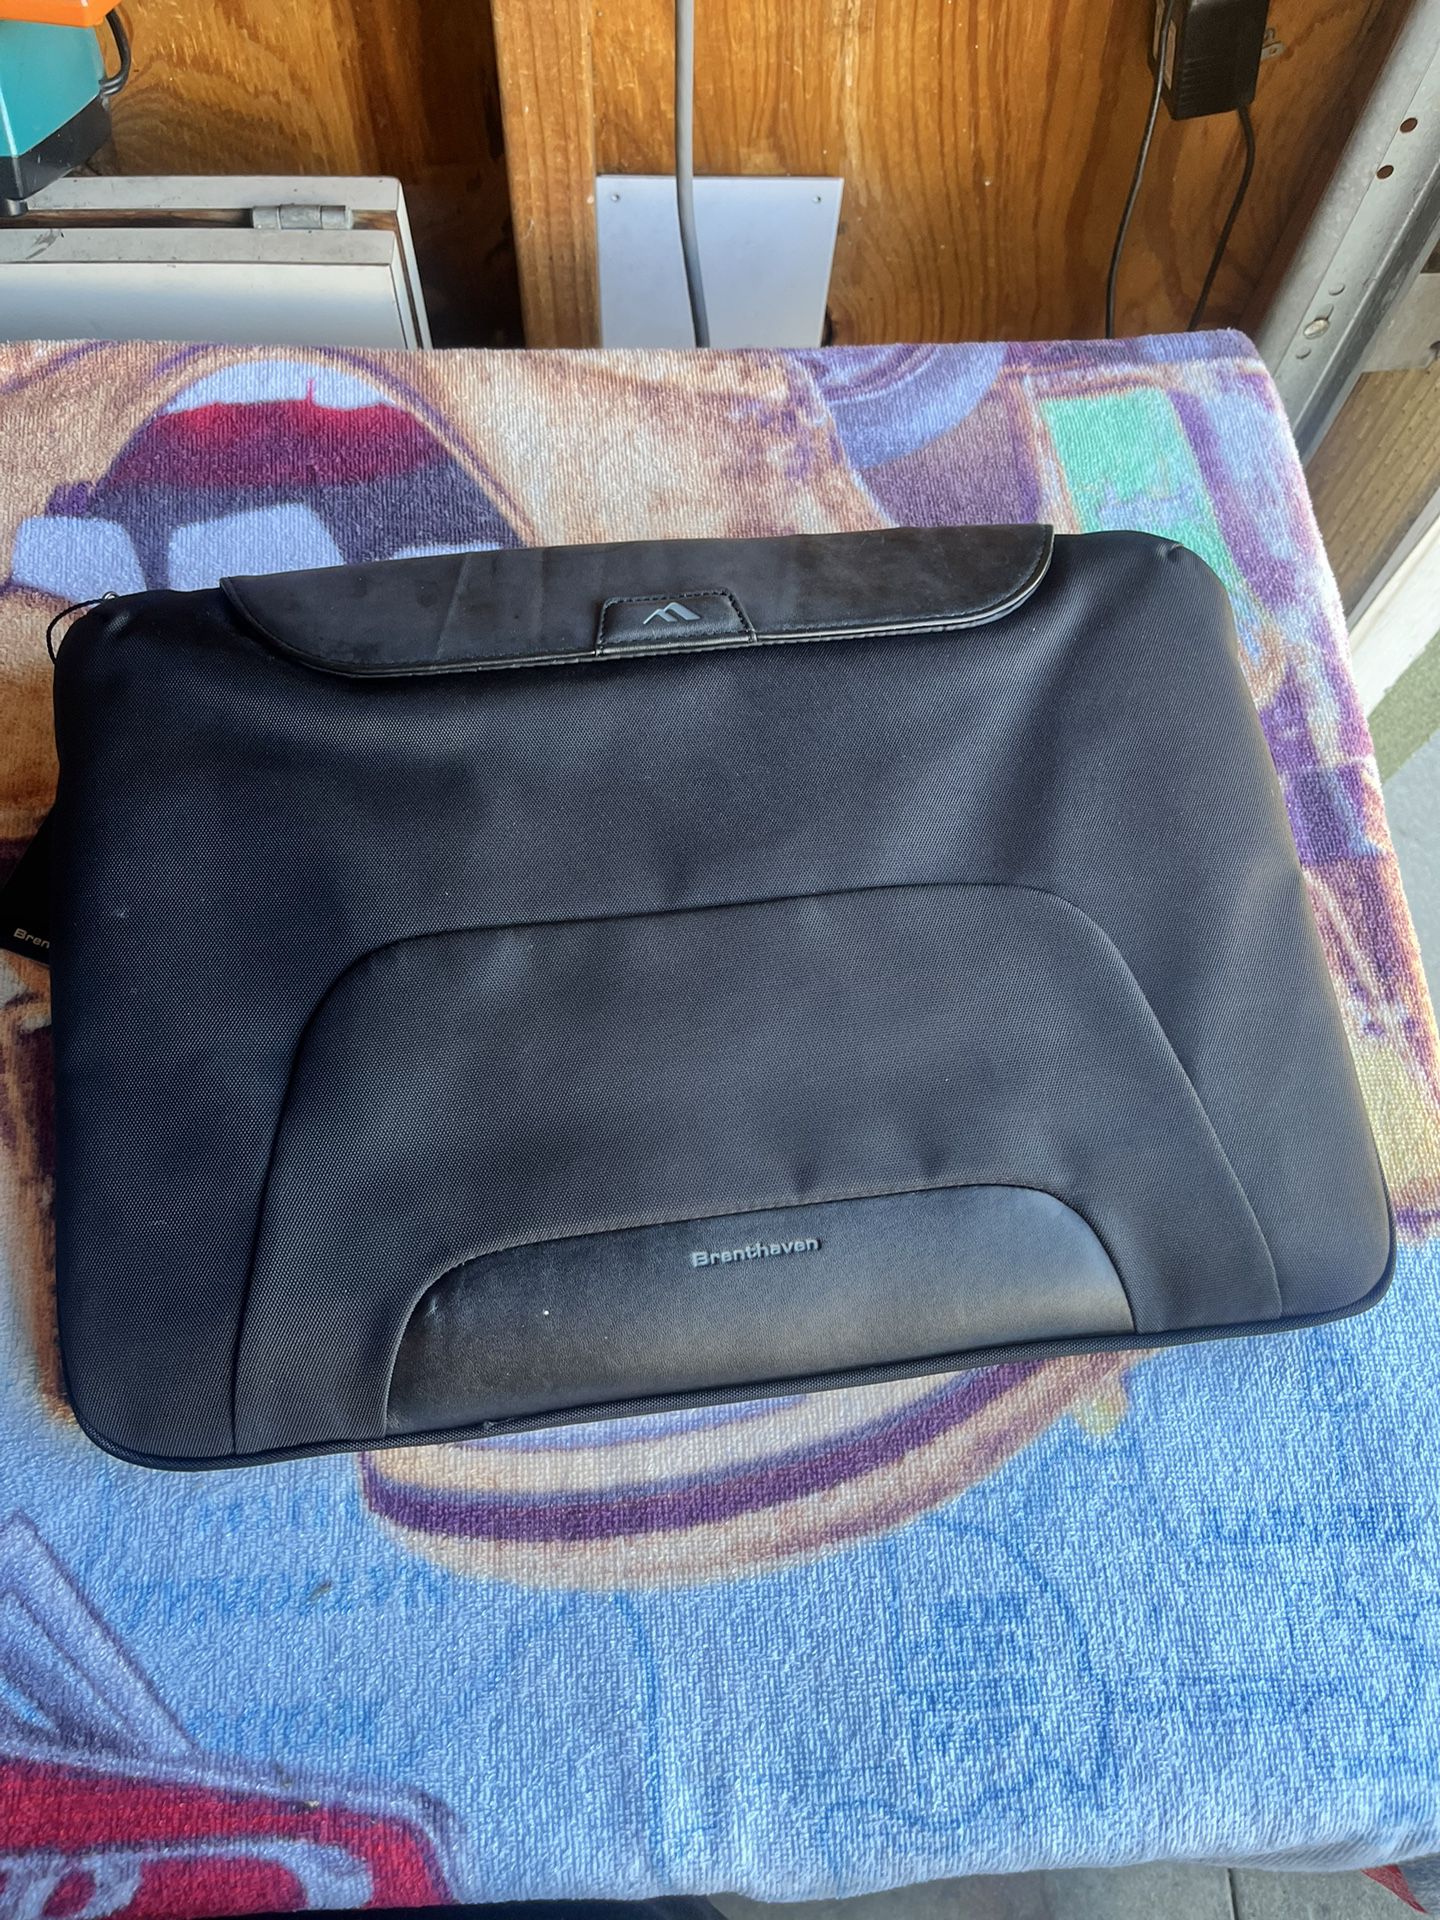 Brand New Brenthhaven  15” Laptop Sleeve Plus $5 Firm 